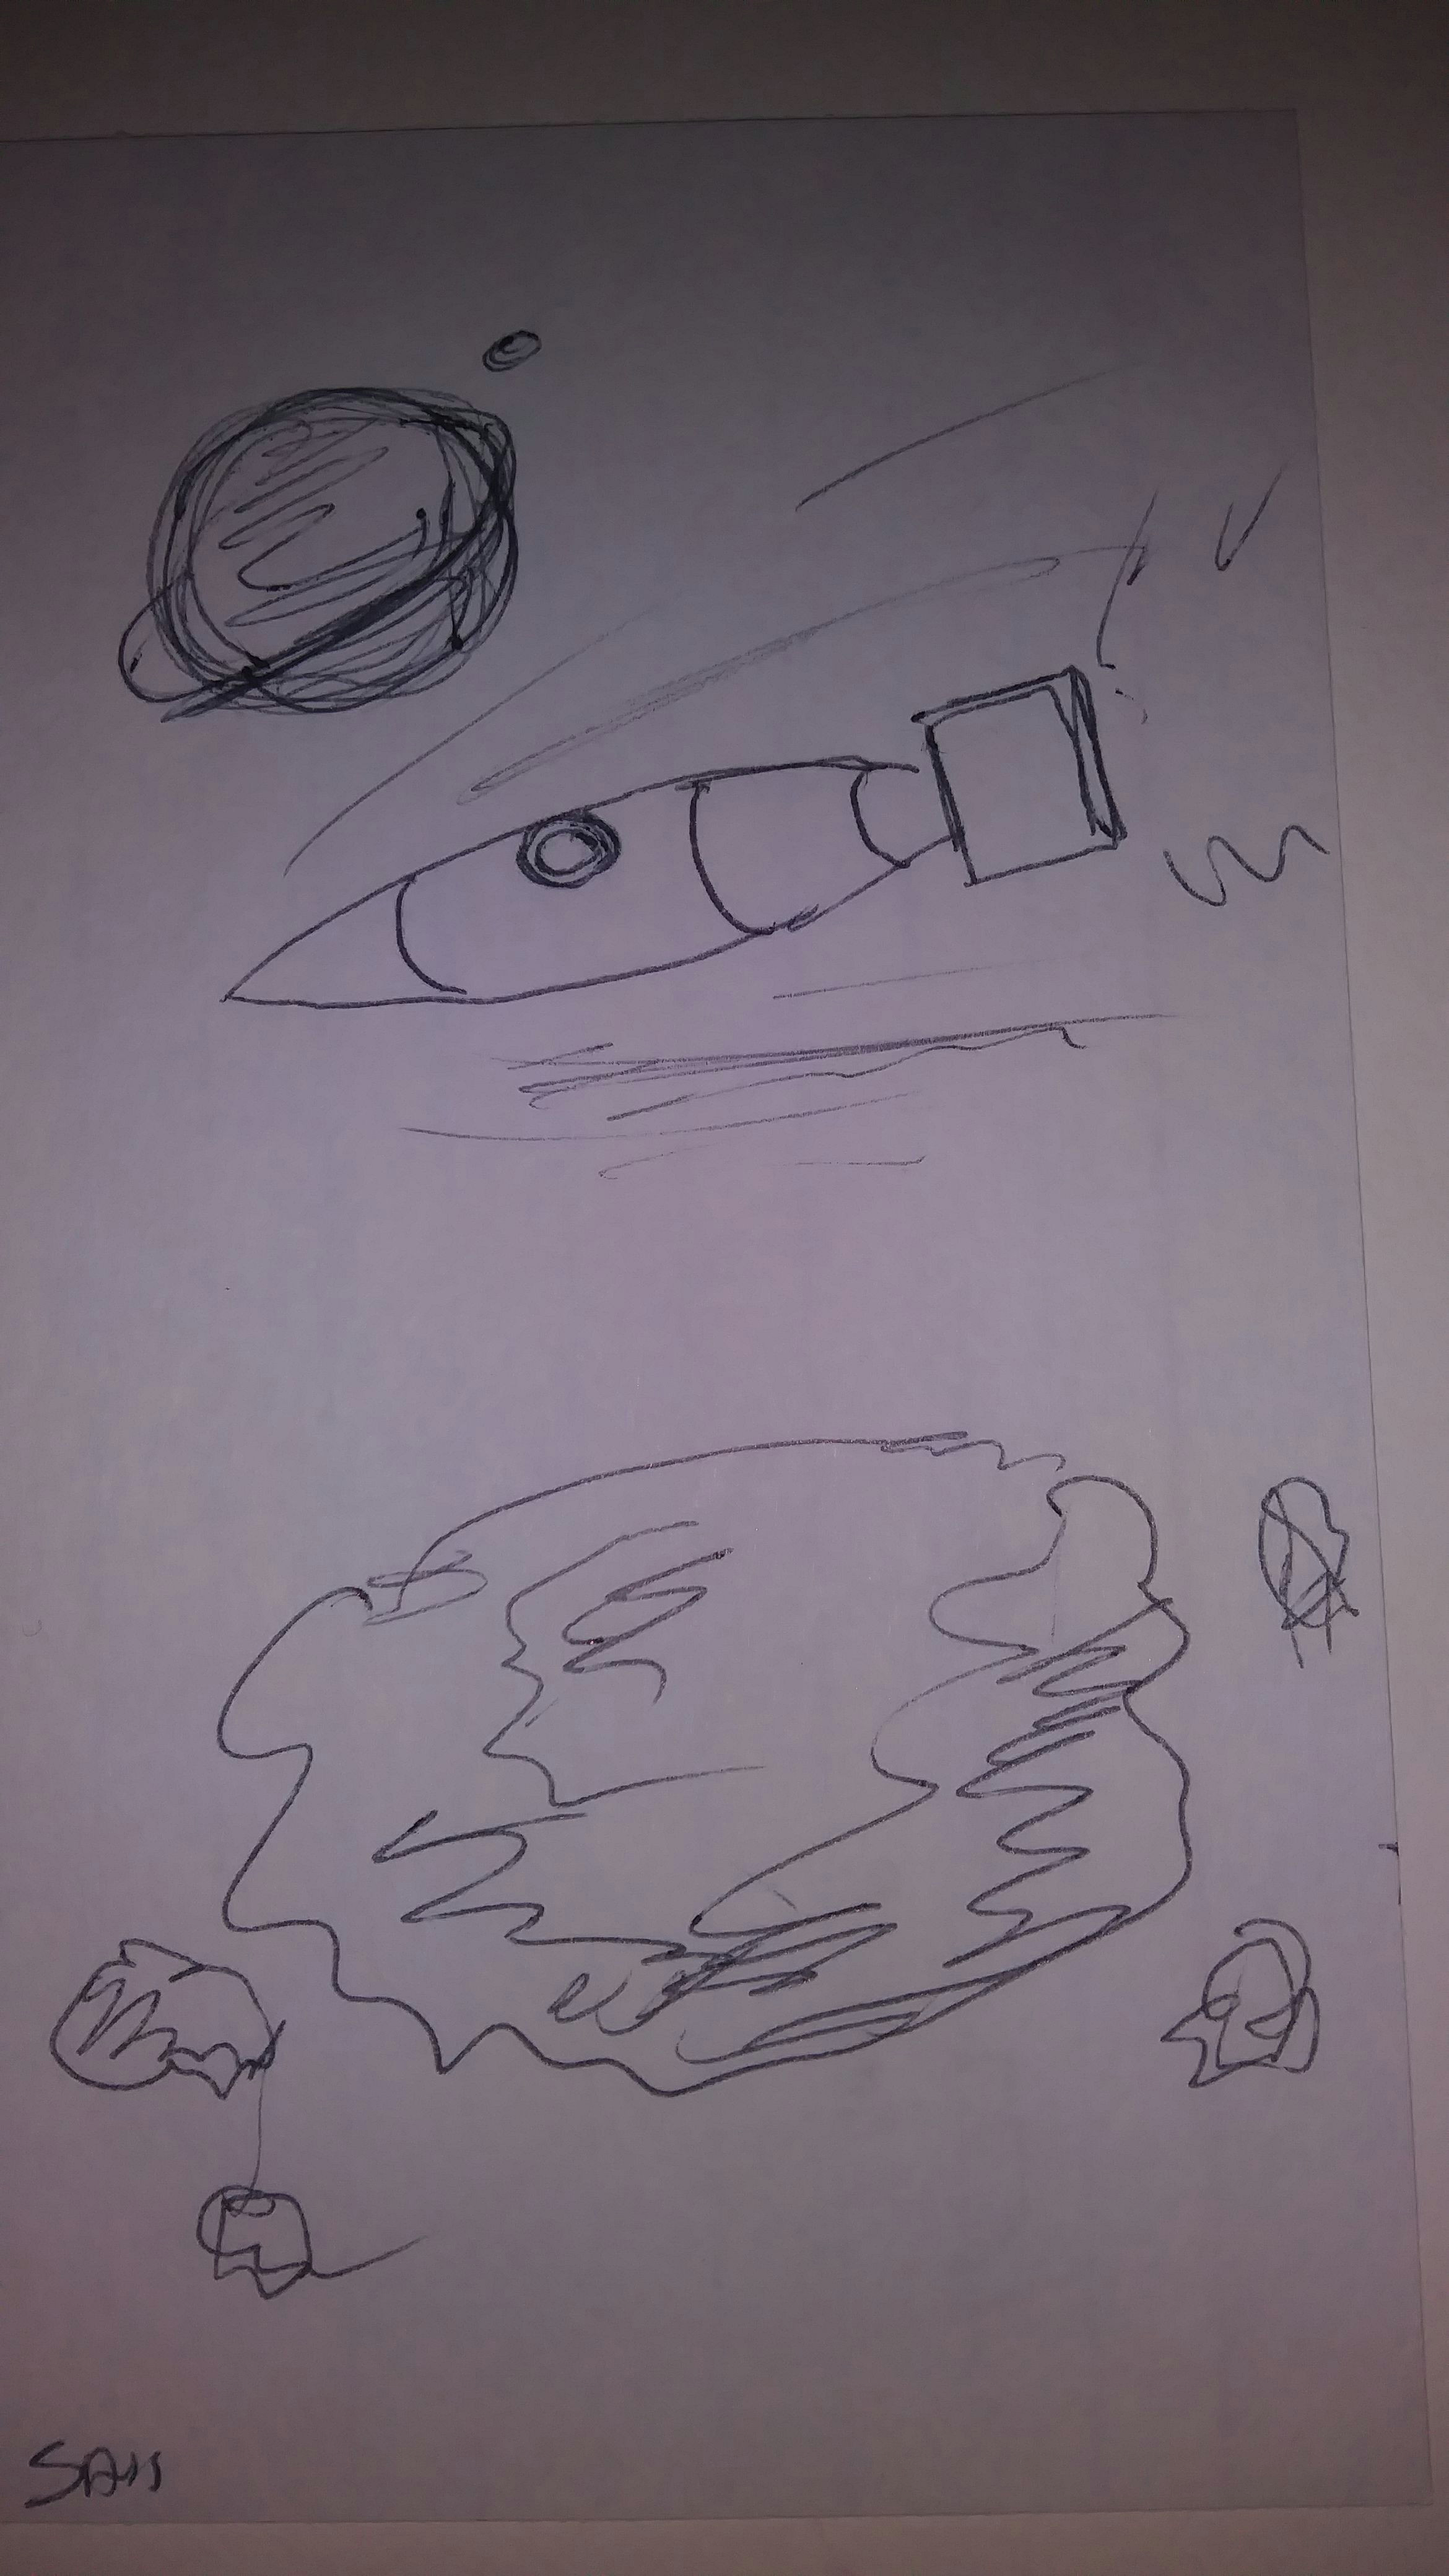 Drawing Of A Cartoon Boat 6 29 2018 Rocket Ship In Space Going Past A Ringed Planet and